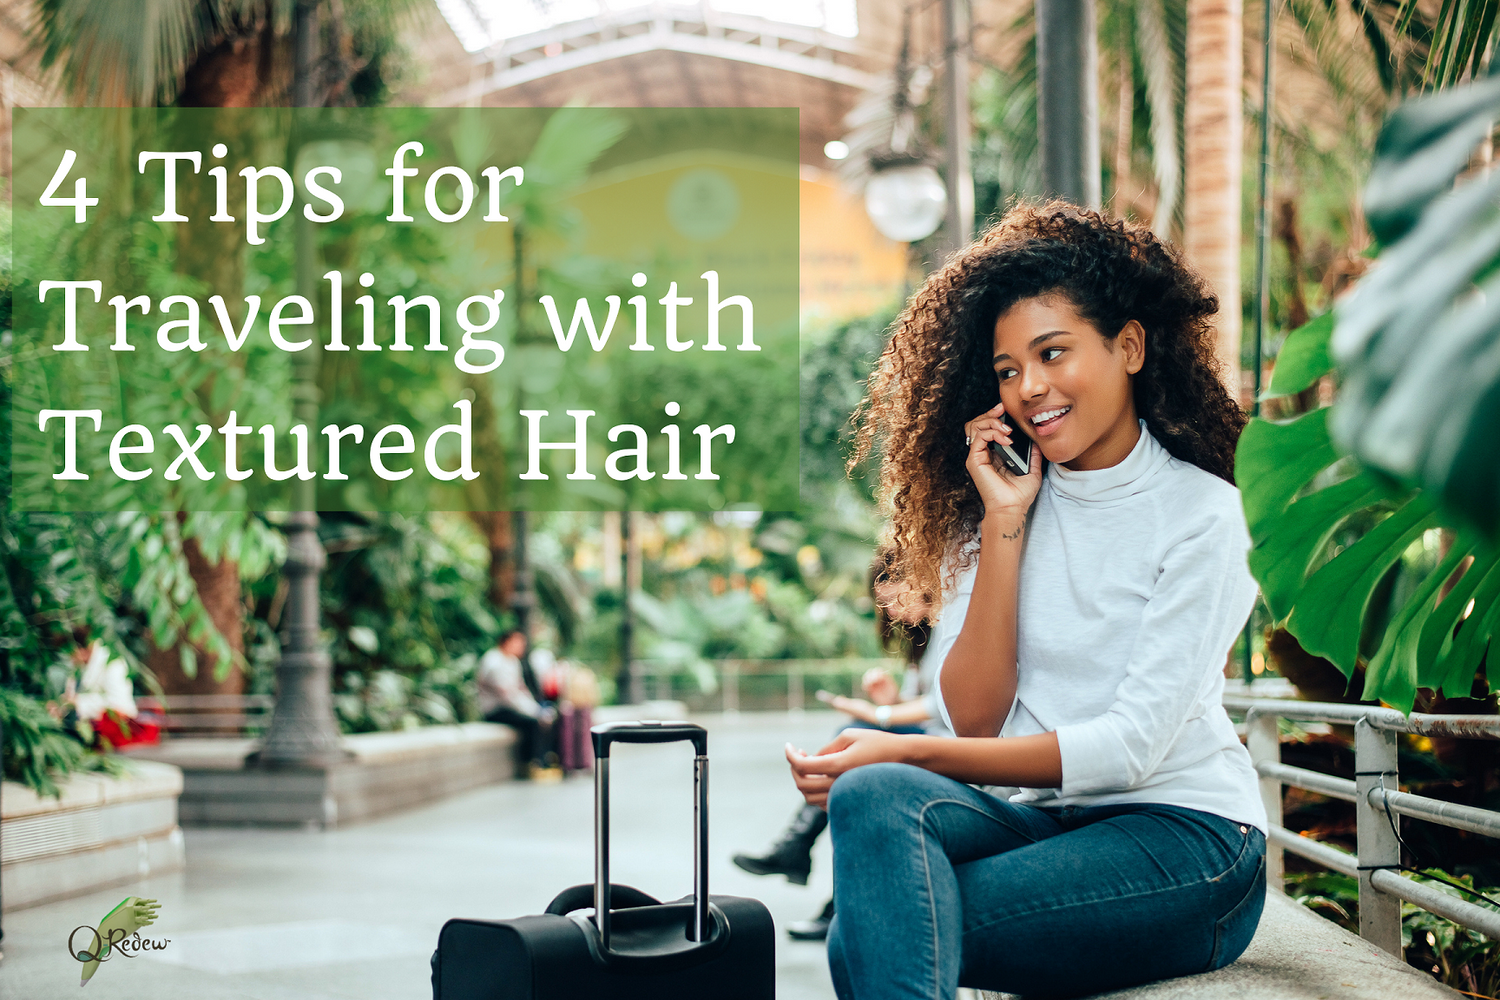 4 Tips for Traveling with Textured Hair